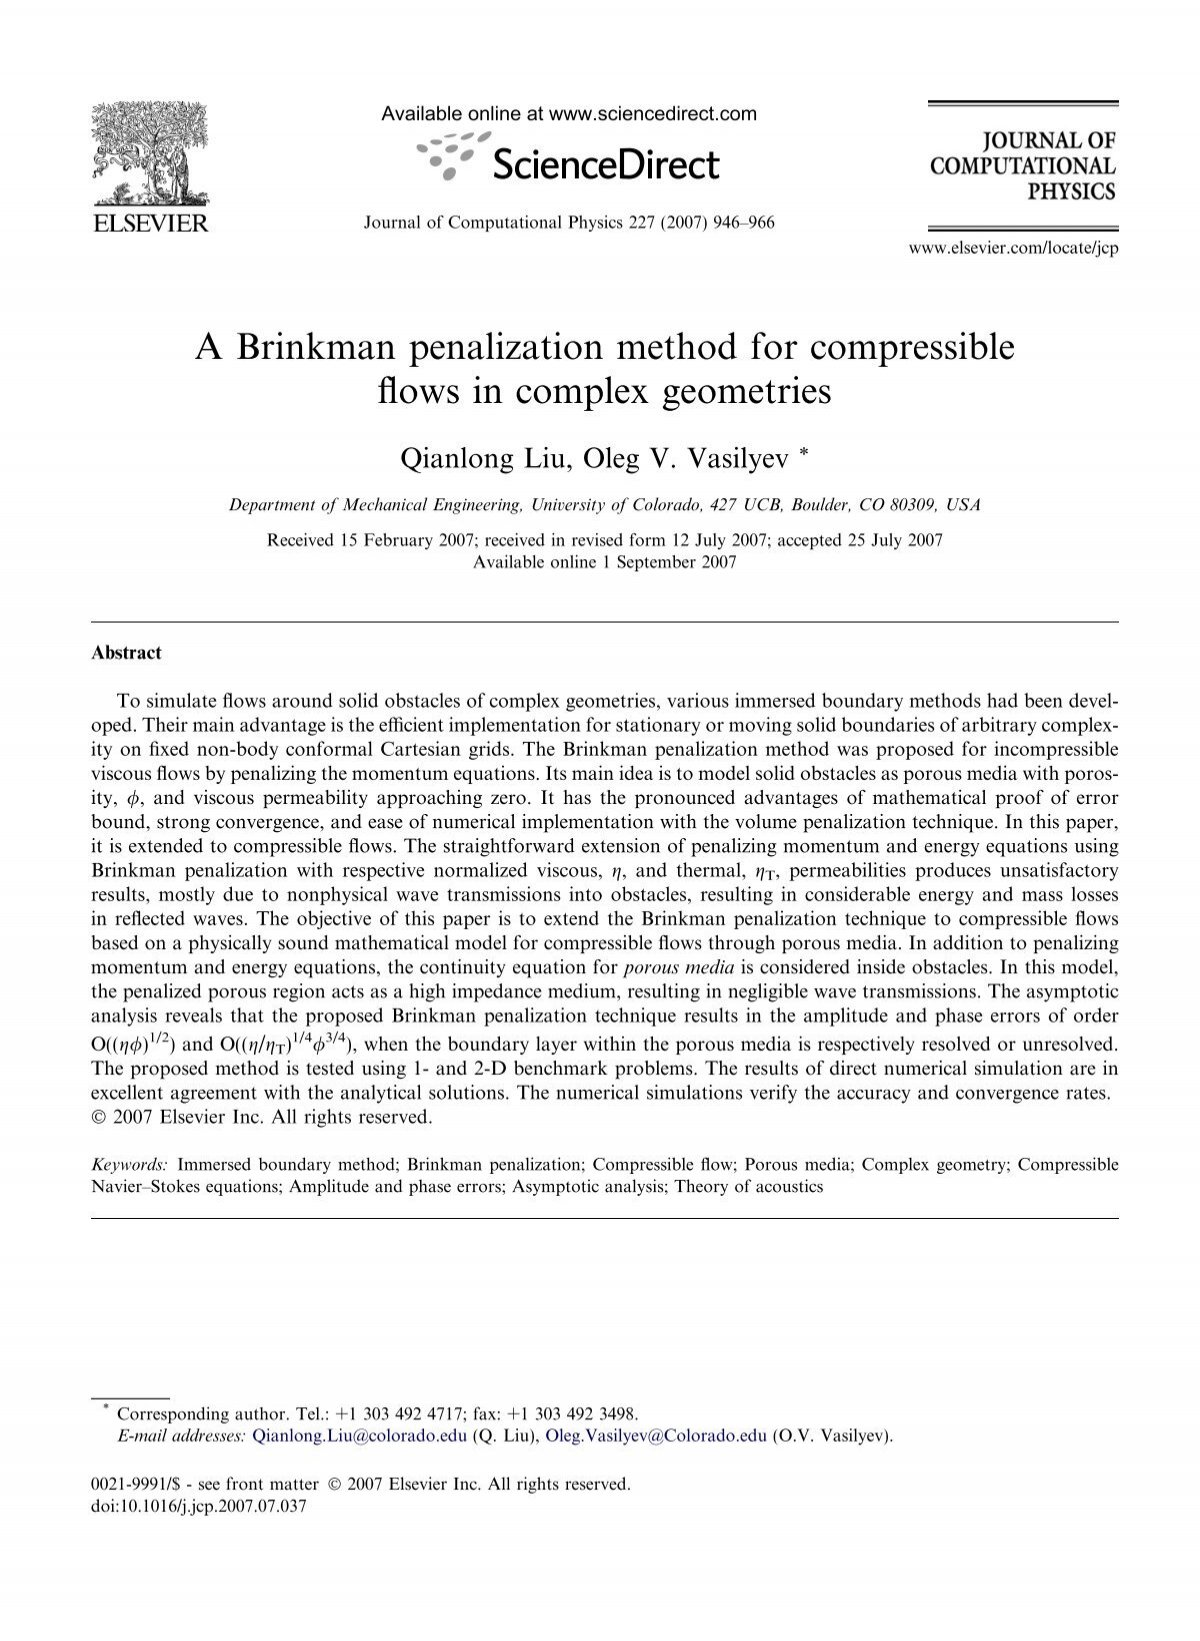 A Brinkman penalization method for compressible flows in complex ...